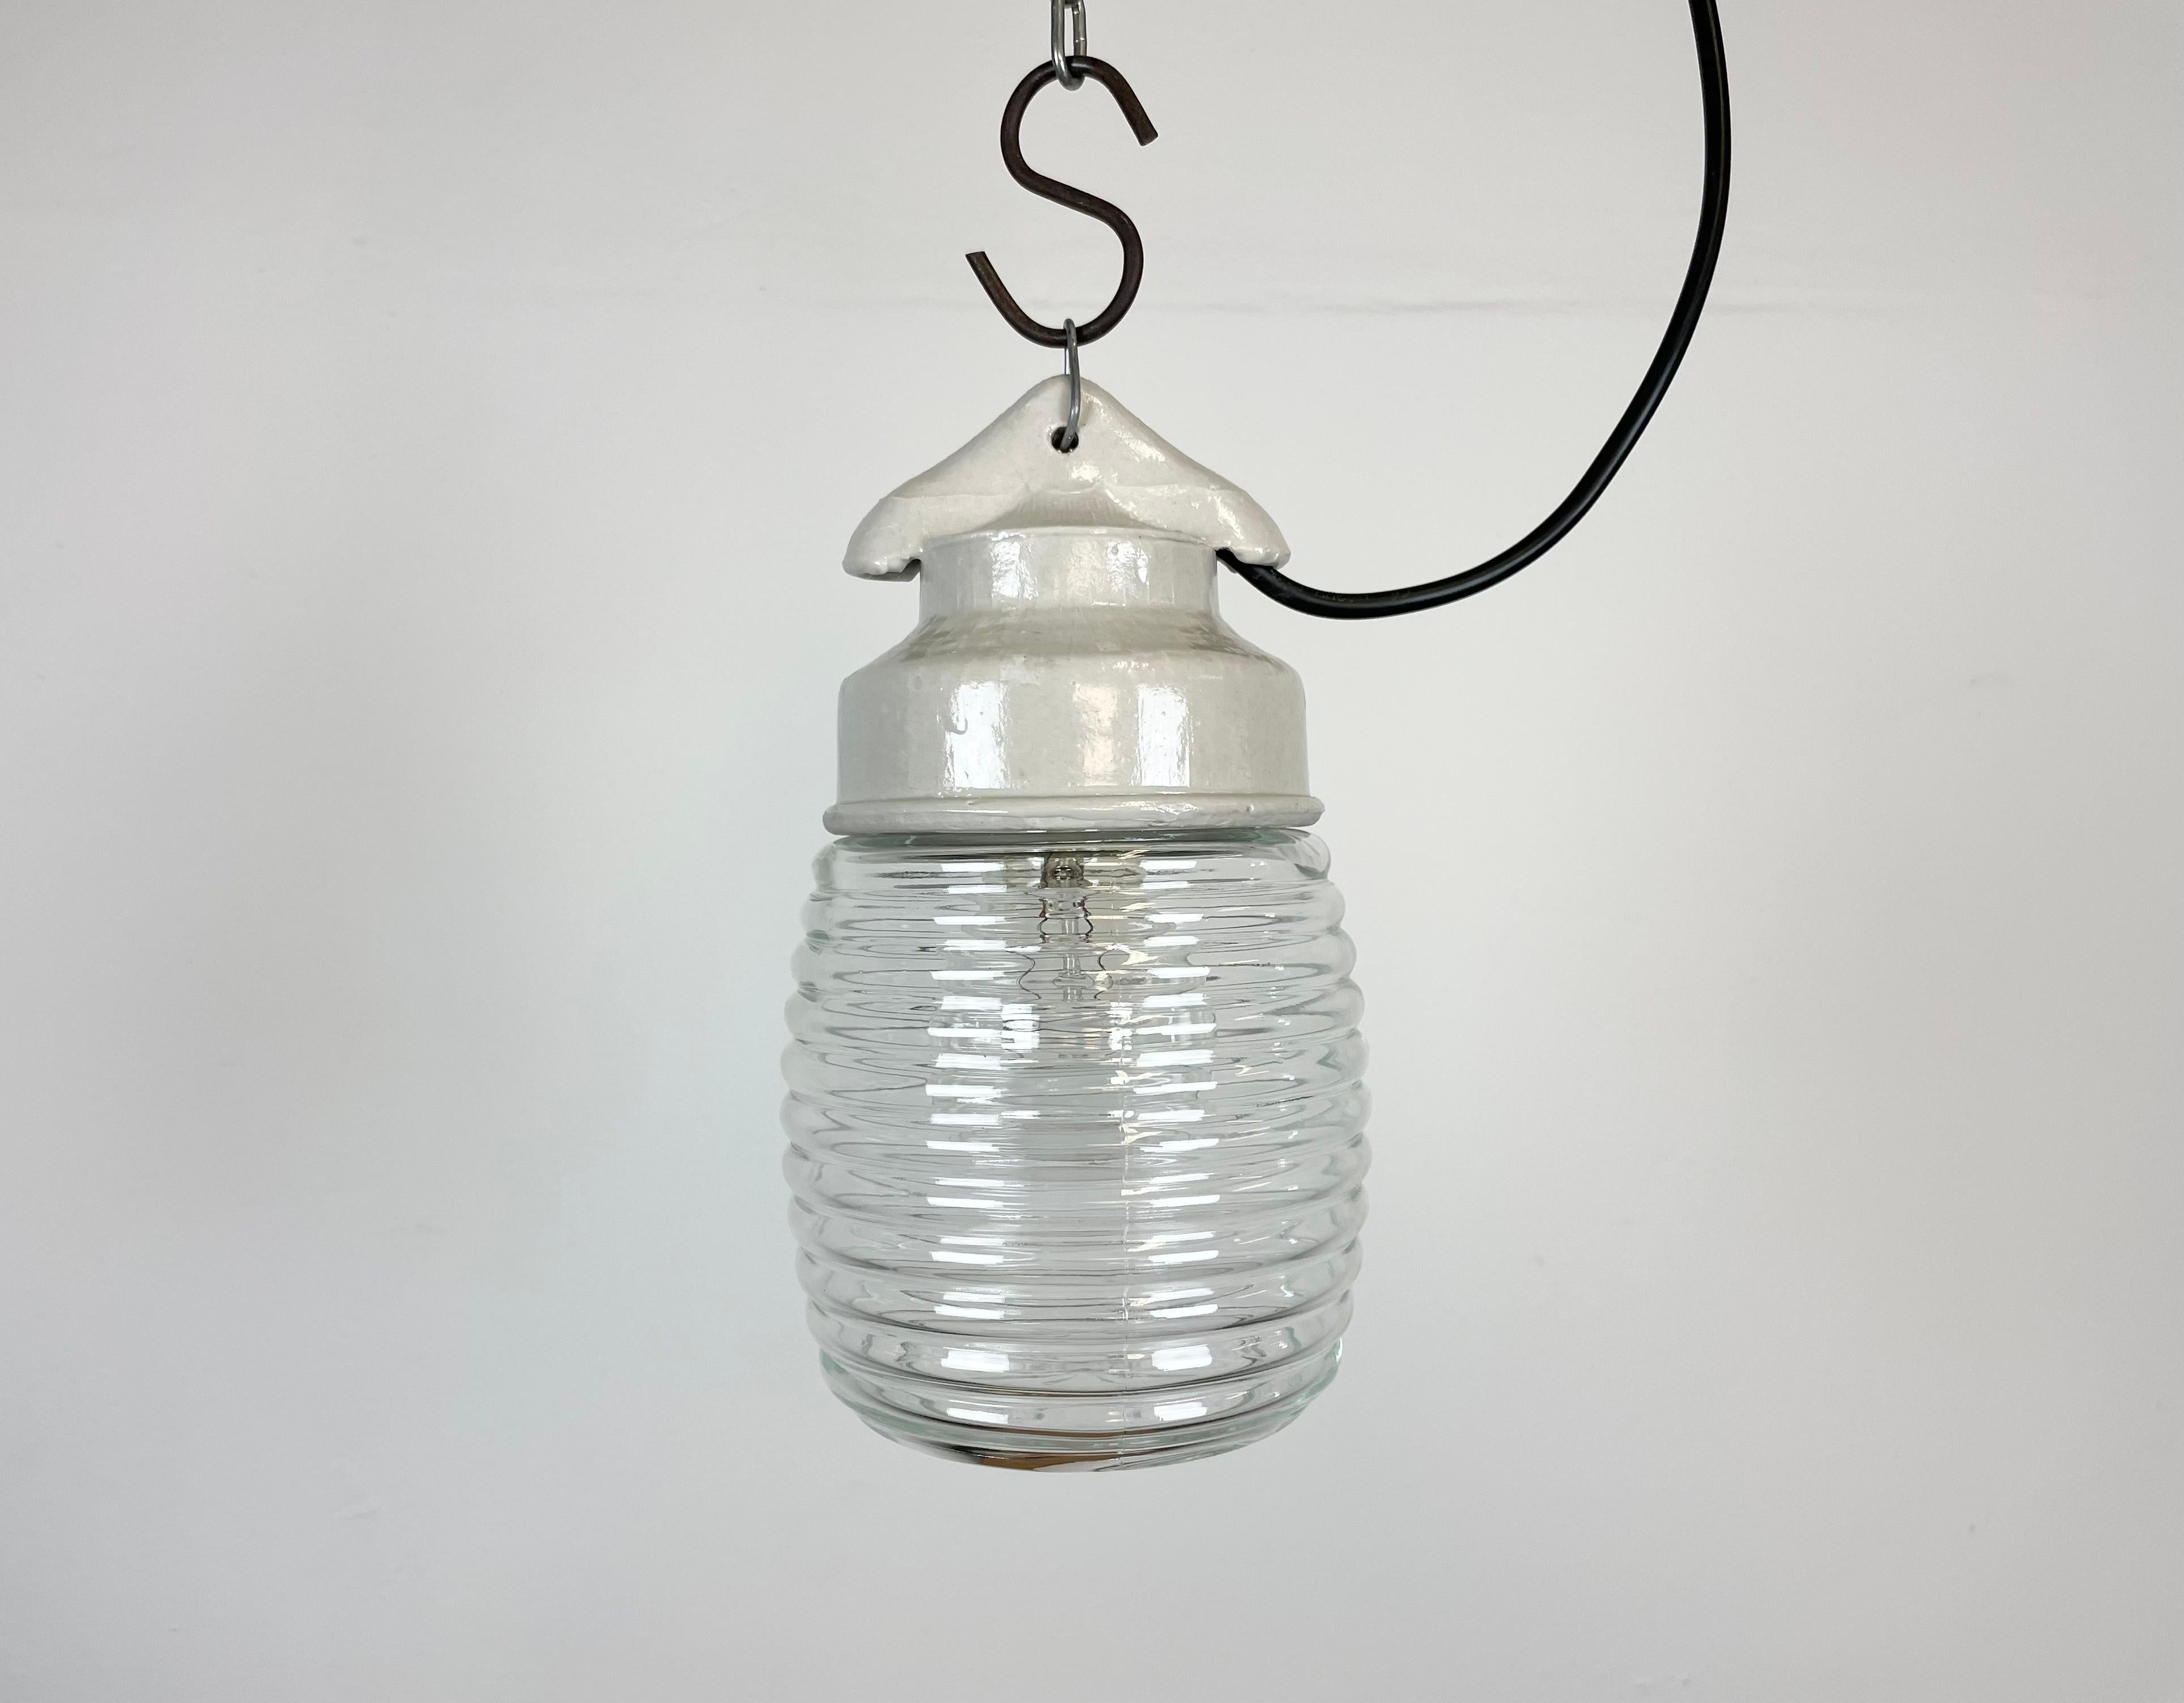 Vintage industrial light made in former Soviet Union during the 1970s.It features white porcelain top and stripped clear glass cover. The socket requires E27 light bulbs. New wire. The weight of the lamp is 1kg.